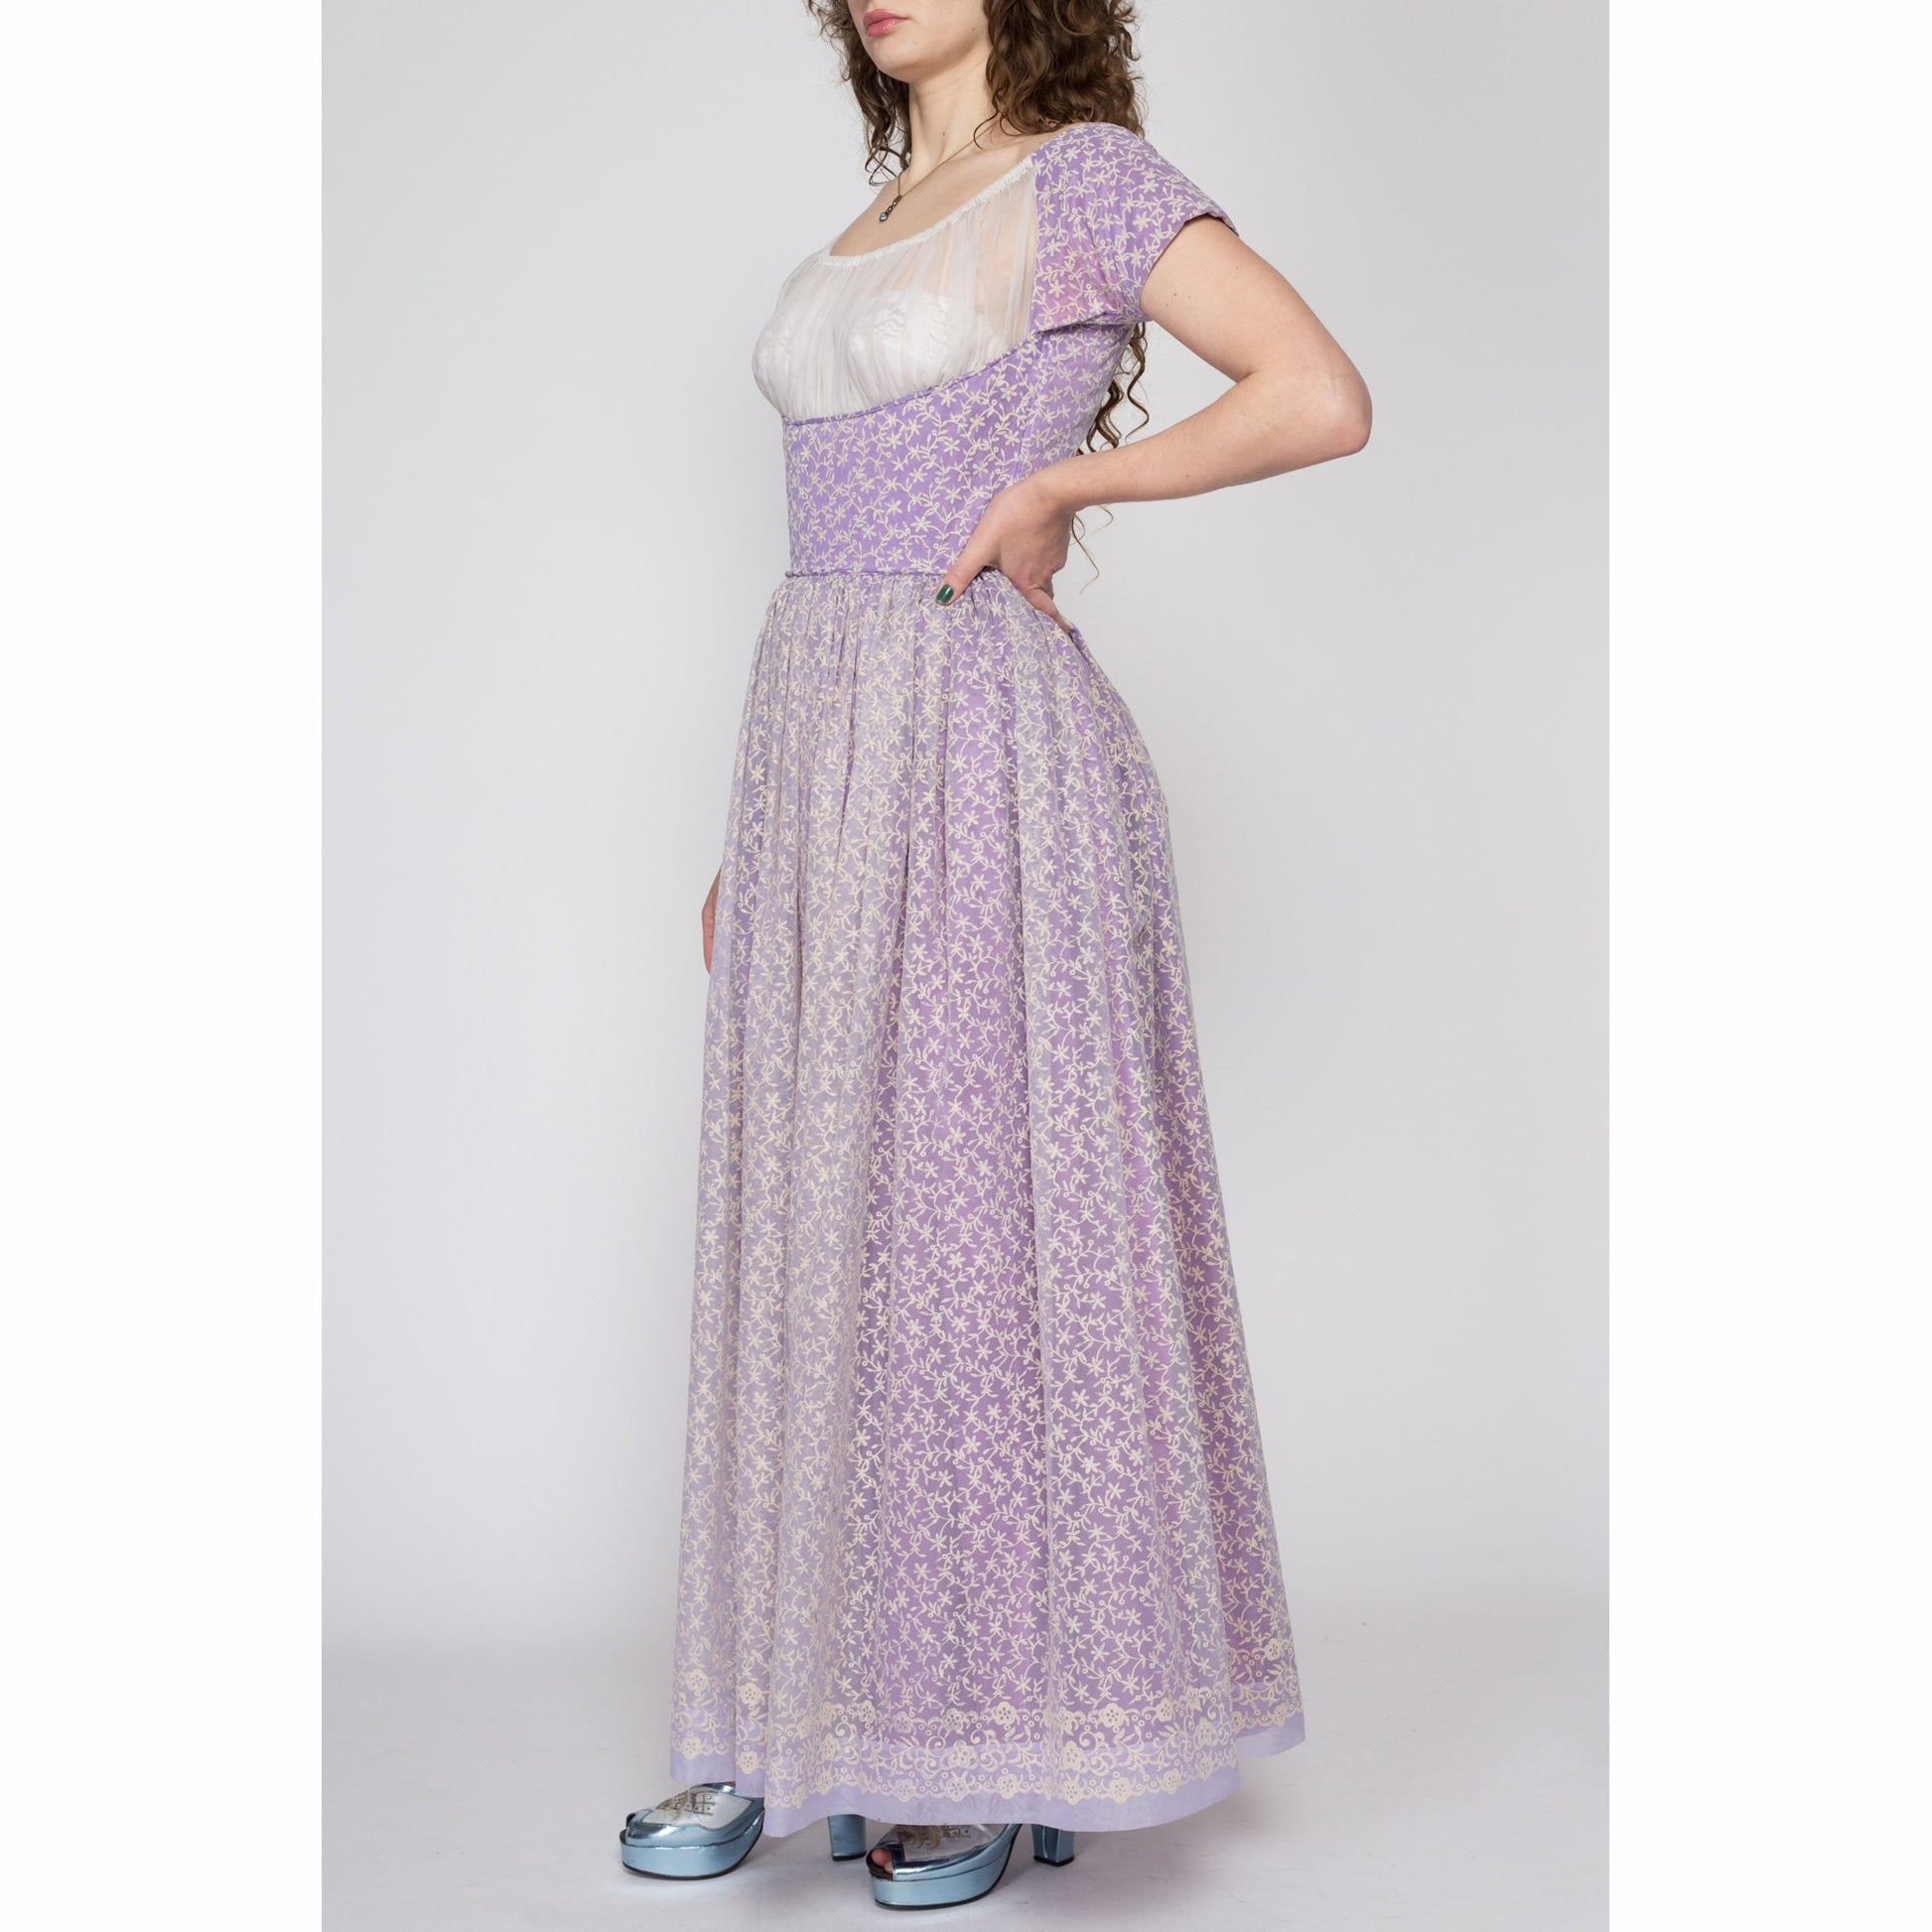 Mauve Purple and Pink Floral Midi Fit n Flare Dress – Skirting the